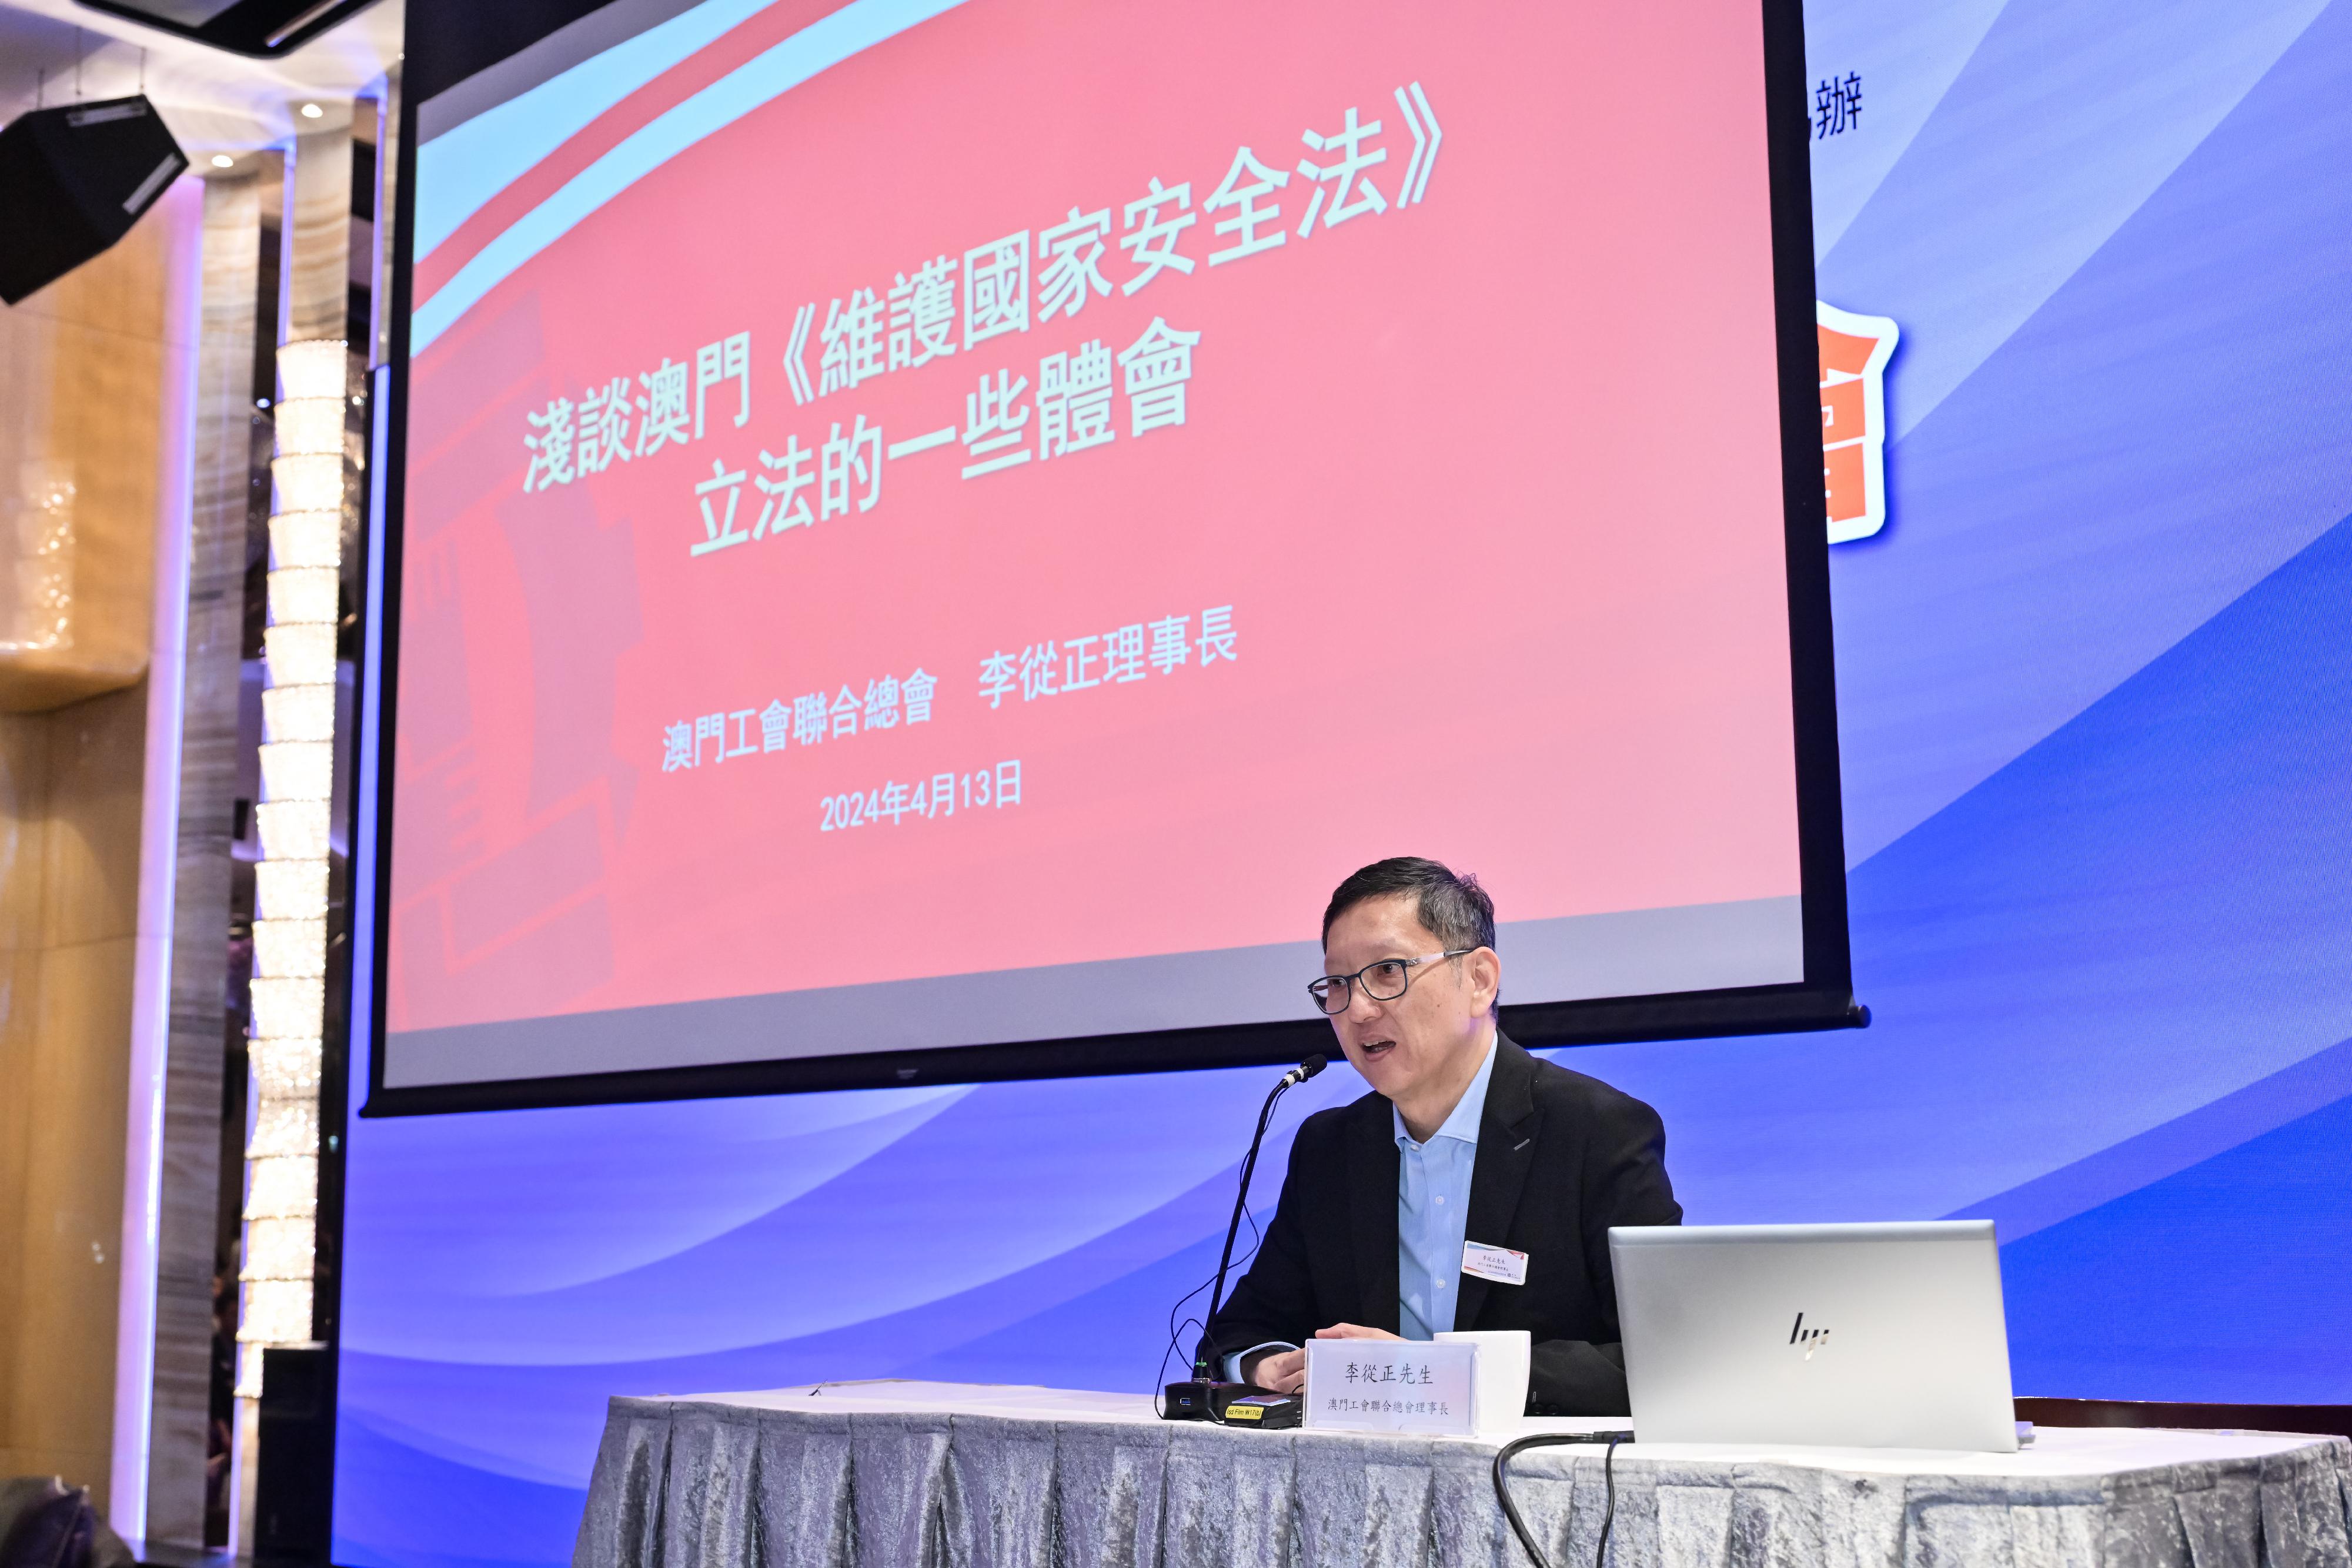 The Registry of Trade Unions of the Labour Department held today (April 13) the Seminar on National Security for Trade Unions. Photo shows the Chairman of the Macao Federation of Trade Unions, Mr Lee Chong-cheng, delivering a talk.
